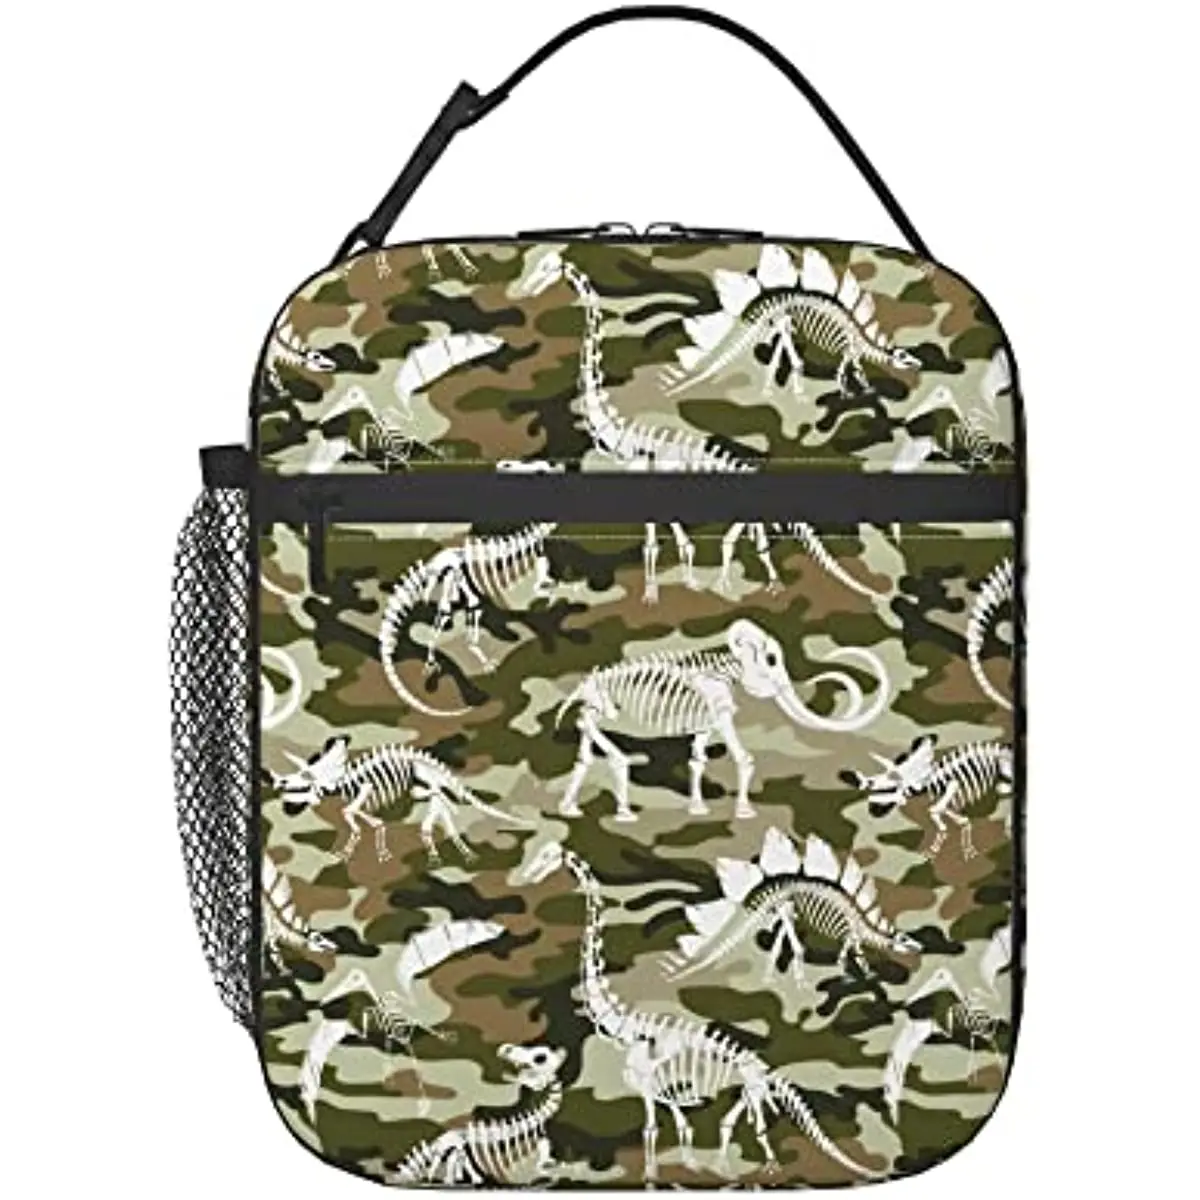 

Dinosaurs Skeletons Camouflage Insulated Lunch Bag Reusable Lunch Box Portable Lunch Tote for Women Men and Kids Bento One Size